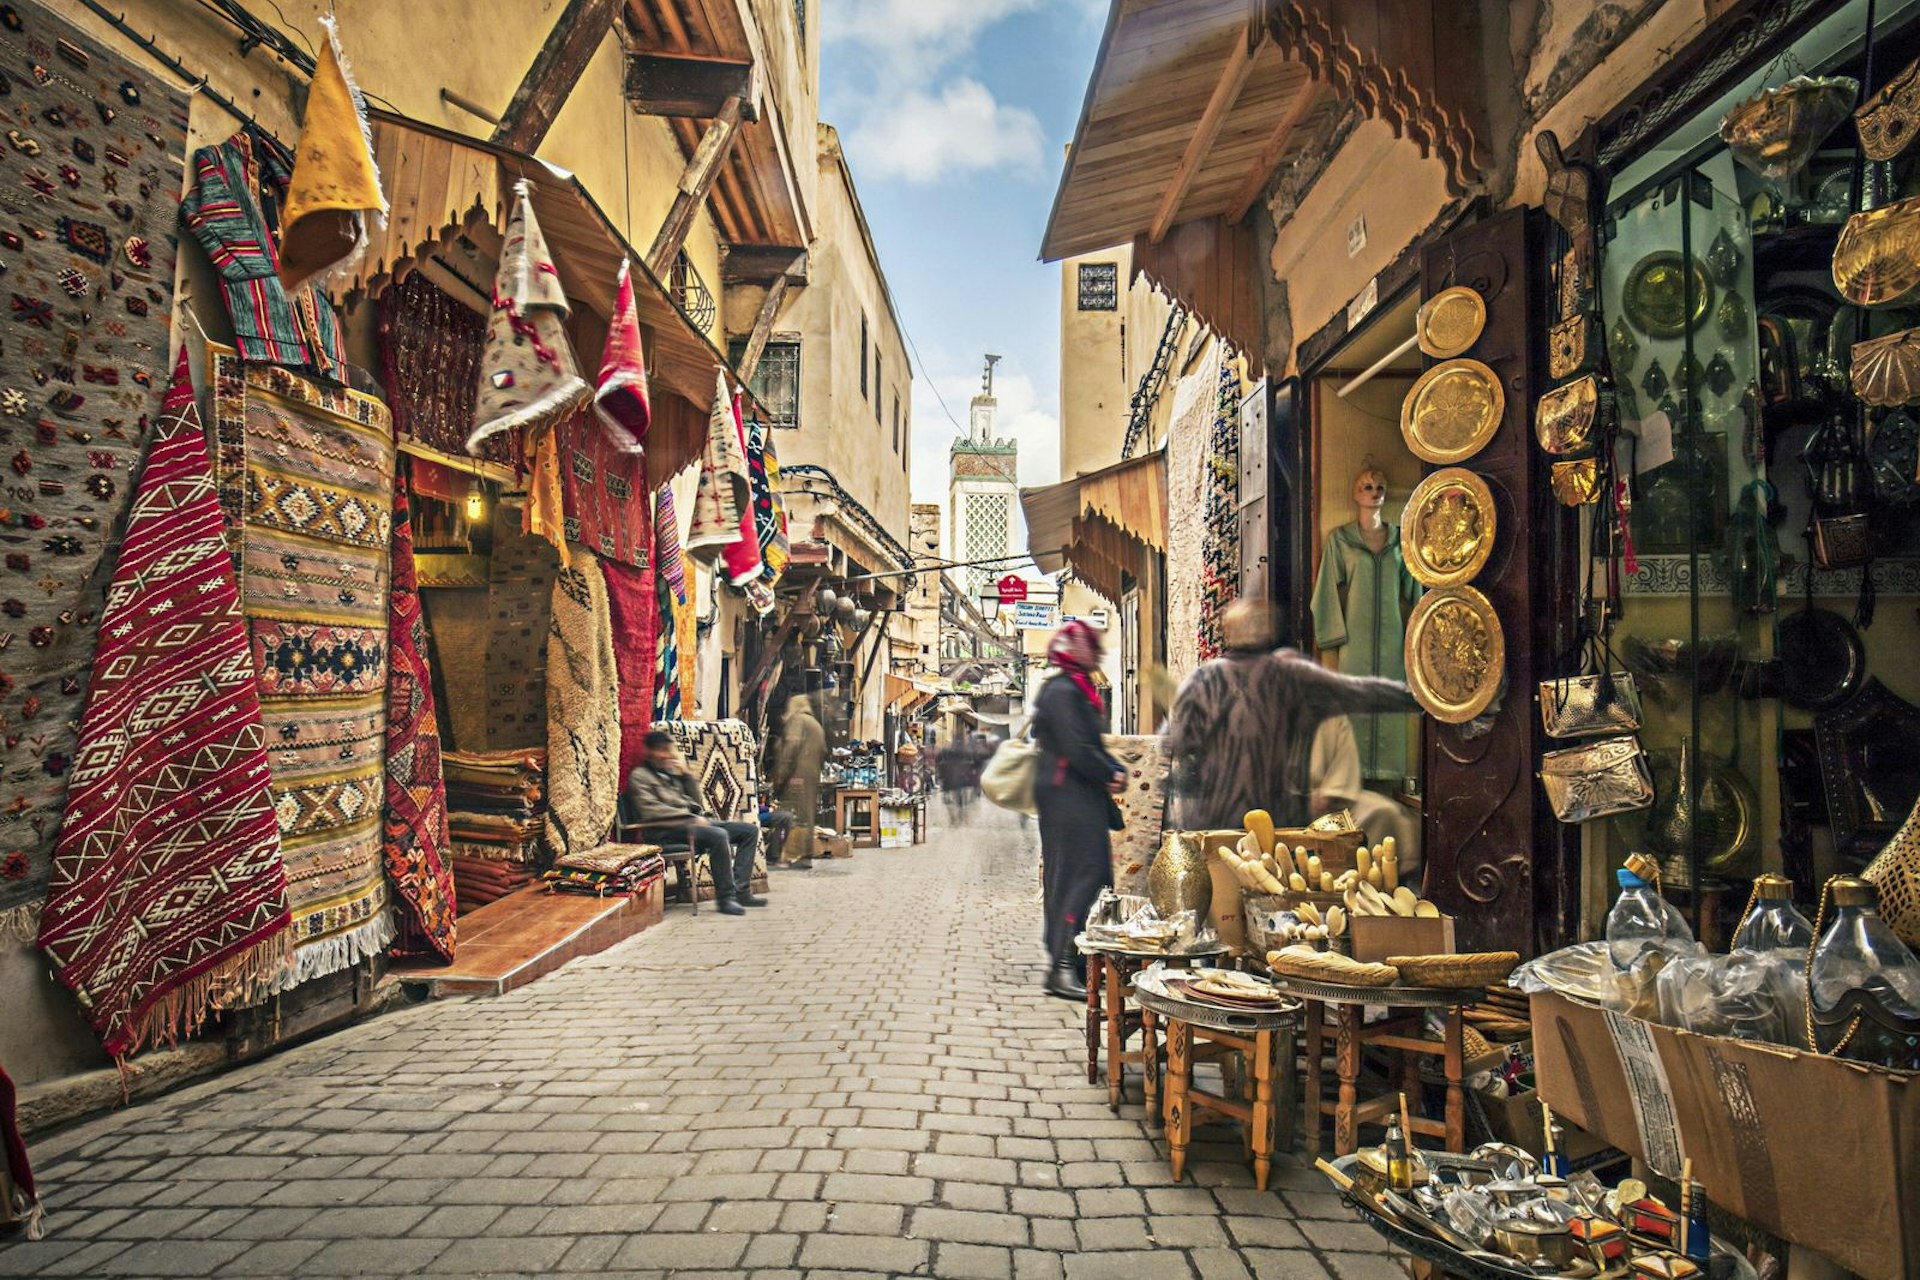 Stores selling their colourful wares in the medina streets of Fez, Morocco